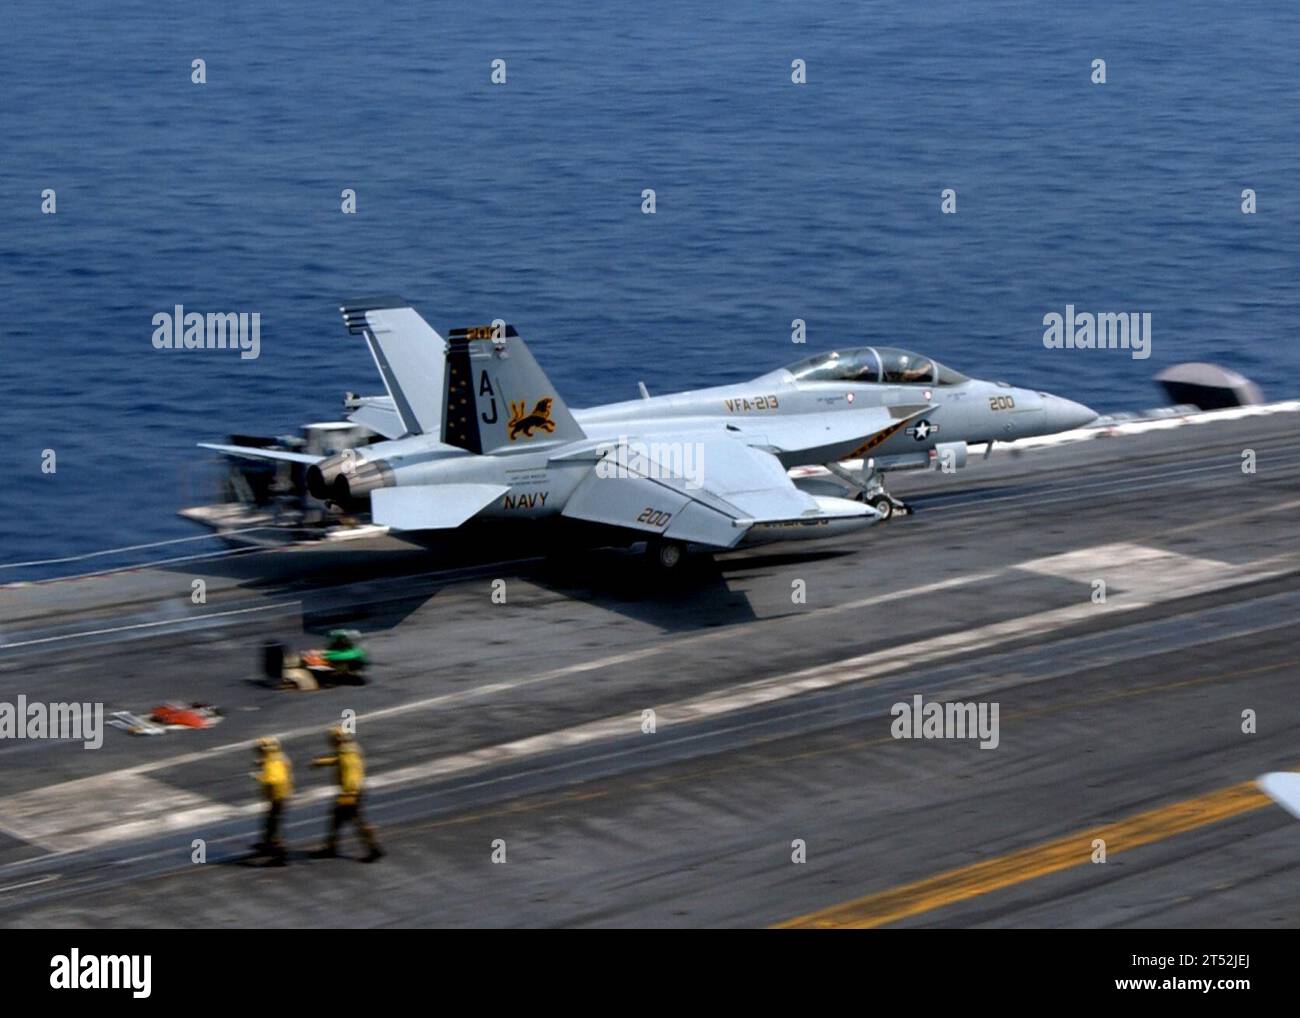 0807224519D-164 ATLANTIC OCEAN (July 22, 2008) An F/A-18E Super Hornet assigned to the 'Blacklions' of Strike Fighter Squadron (VFA) 213 launches from the flight deck of the Nimitz-class aircraft carrier USS Theodore Roosevelt (CVN 71). The Theodore Roosevelt Carrier Strike Group is participating in Joint Task Force Exercise 'Operation Brimstone' off the Atlantic coast. Navy Stock Photo